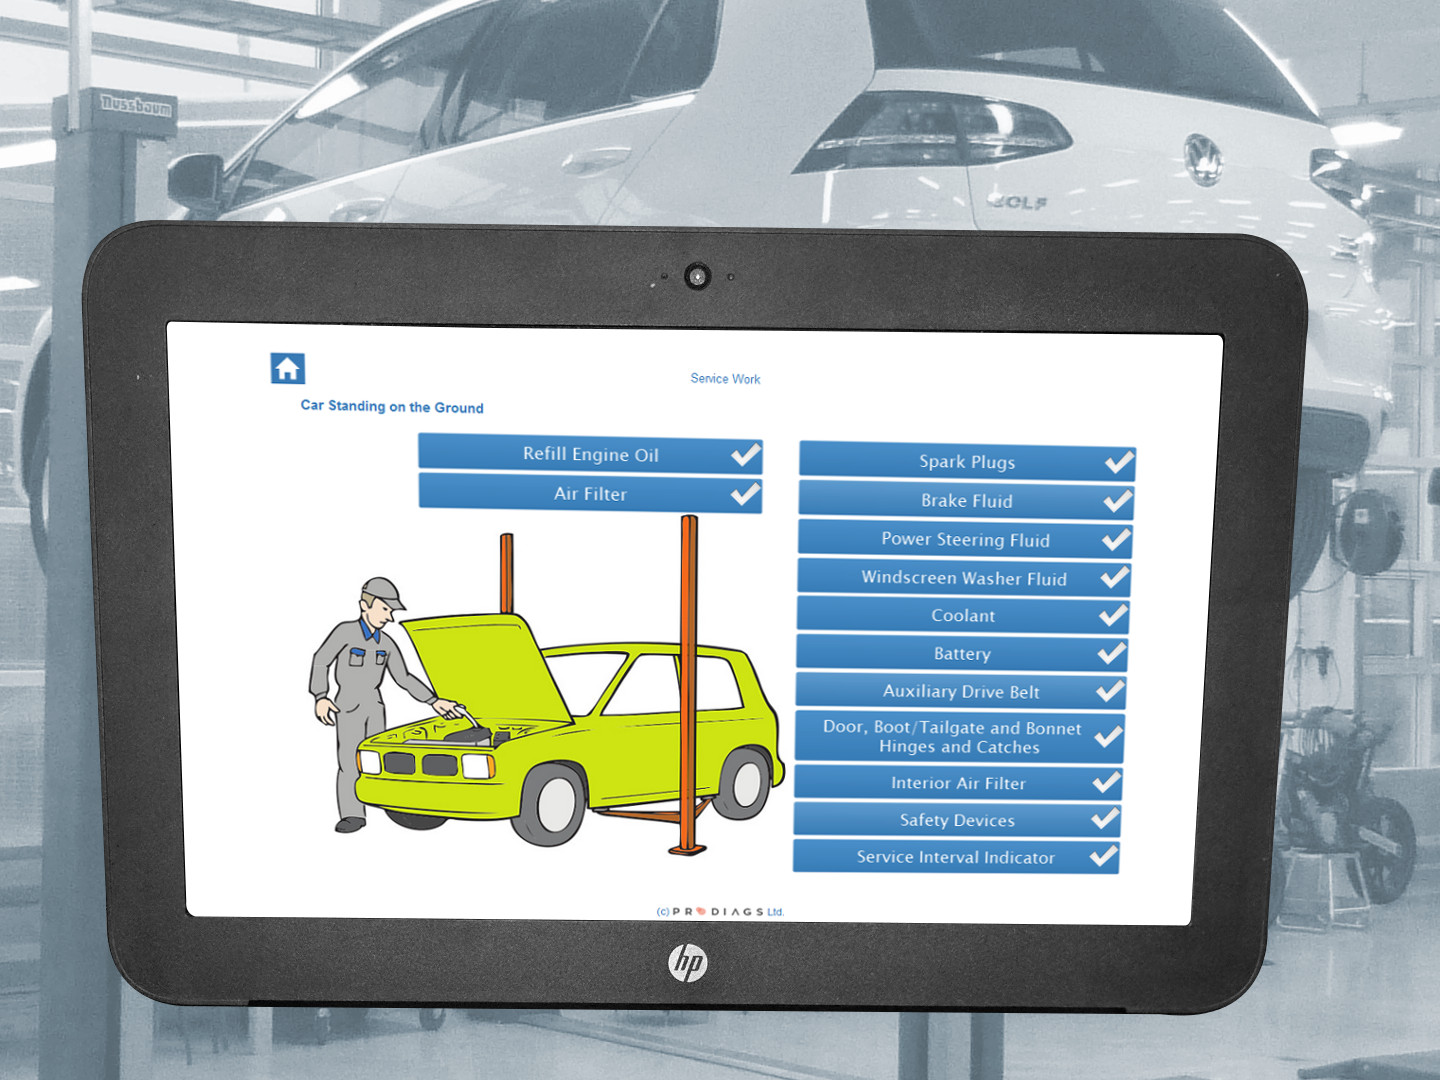 Learn the correct vehicle repair process with this training for Automotive service mechanics. Learn the correct procedures and work order for an efficient job as a maintenance mechanic.